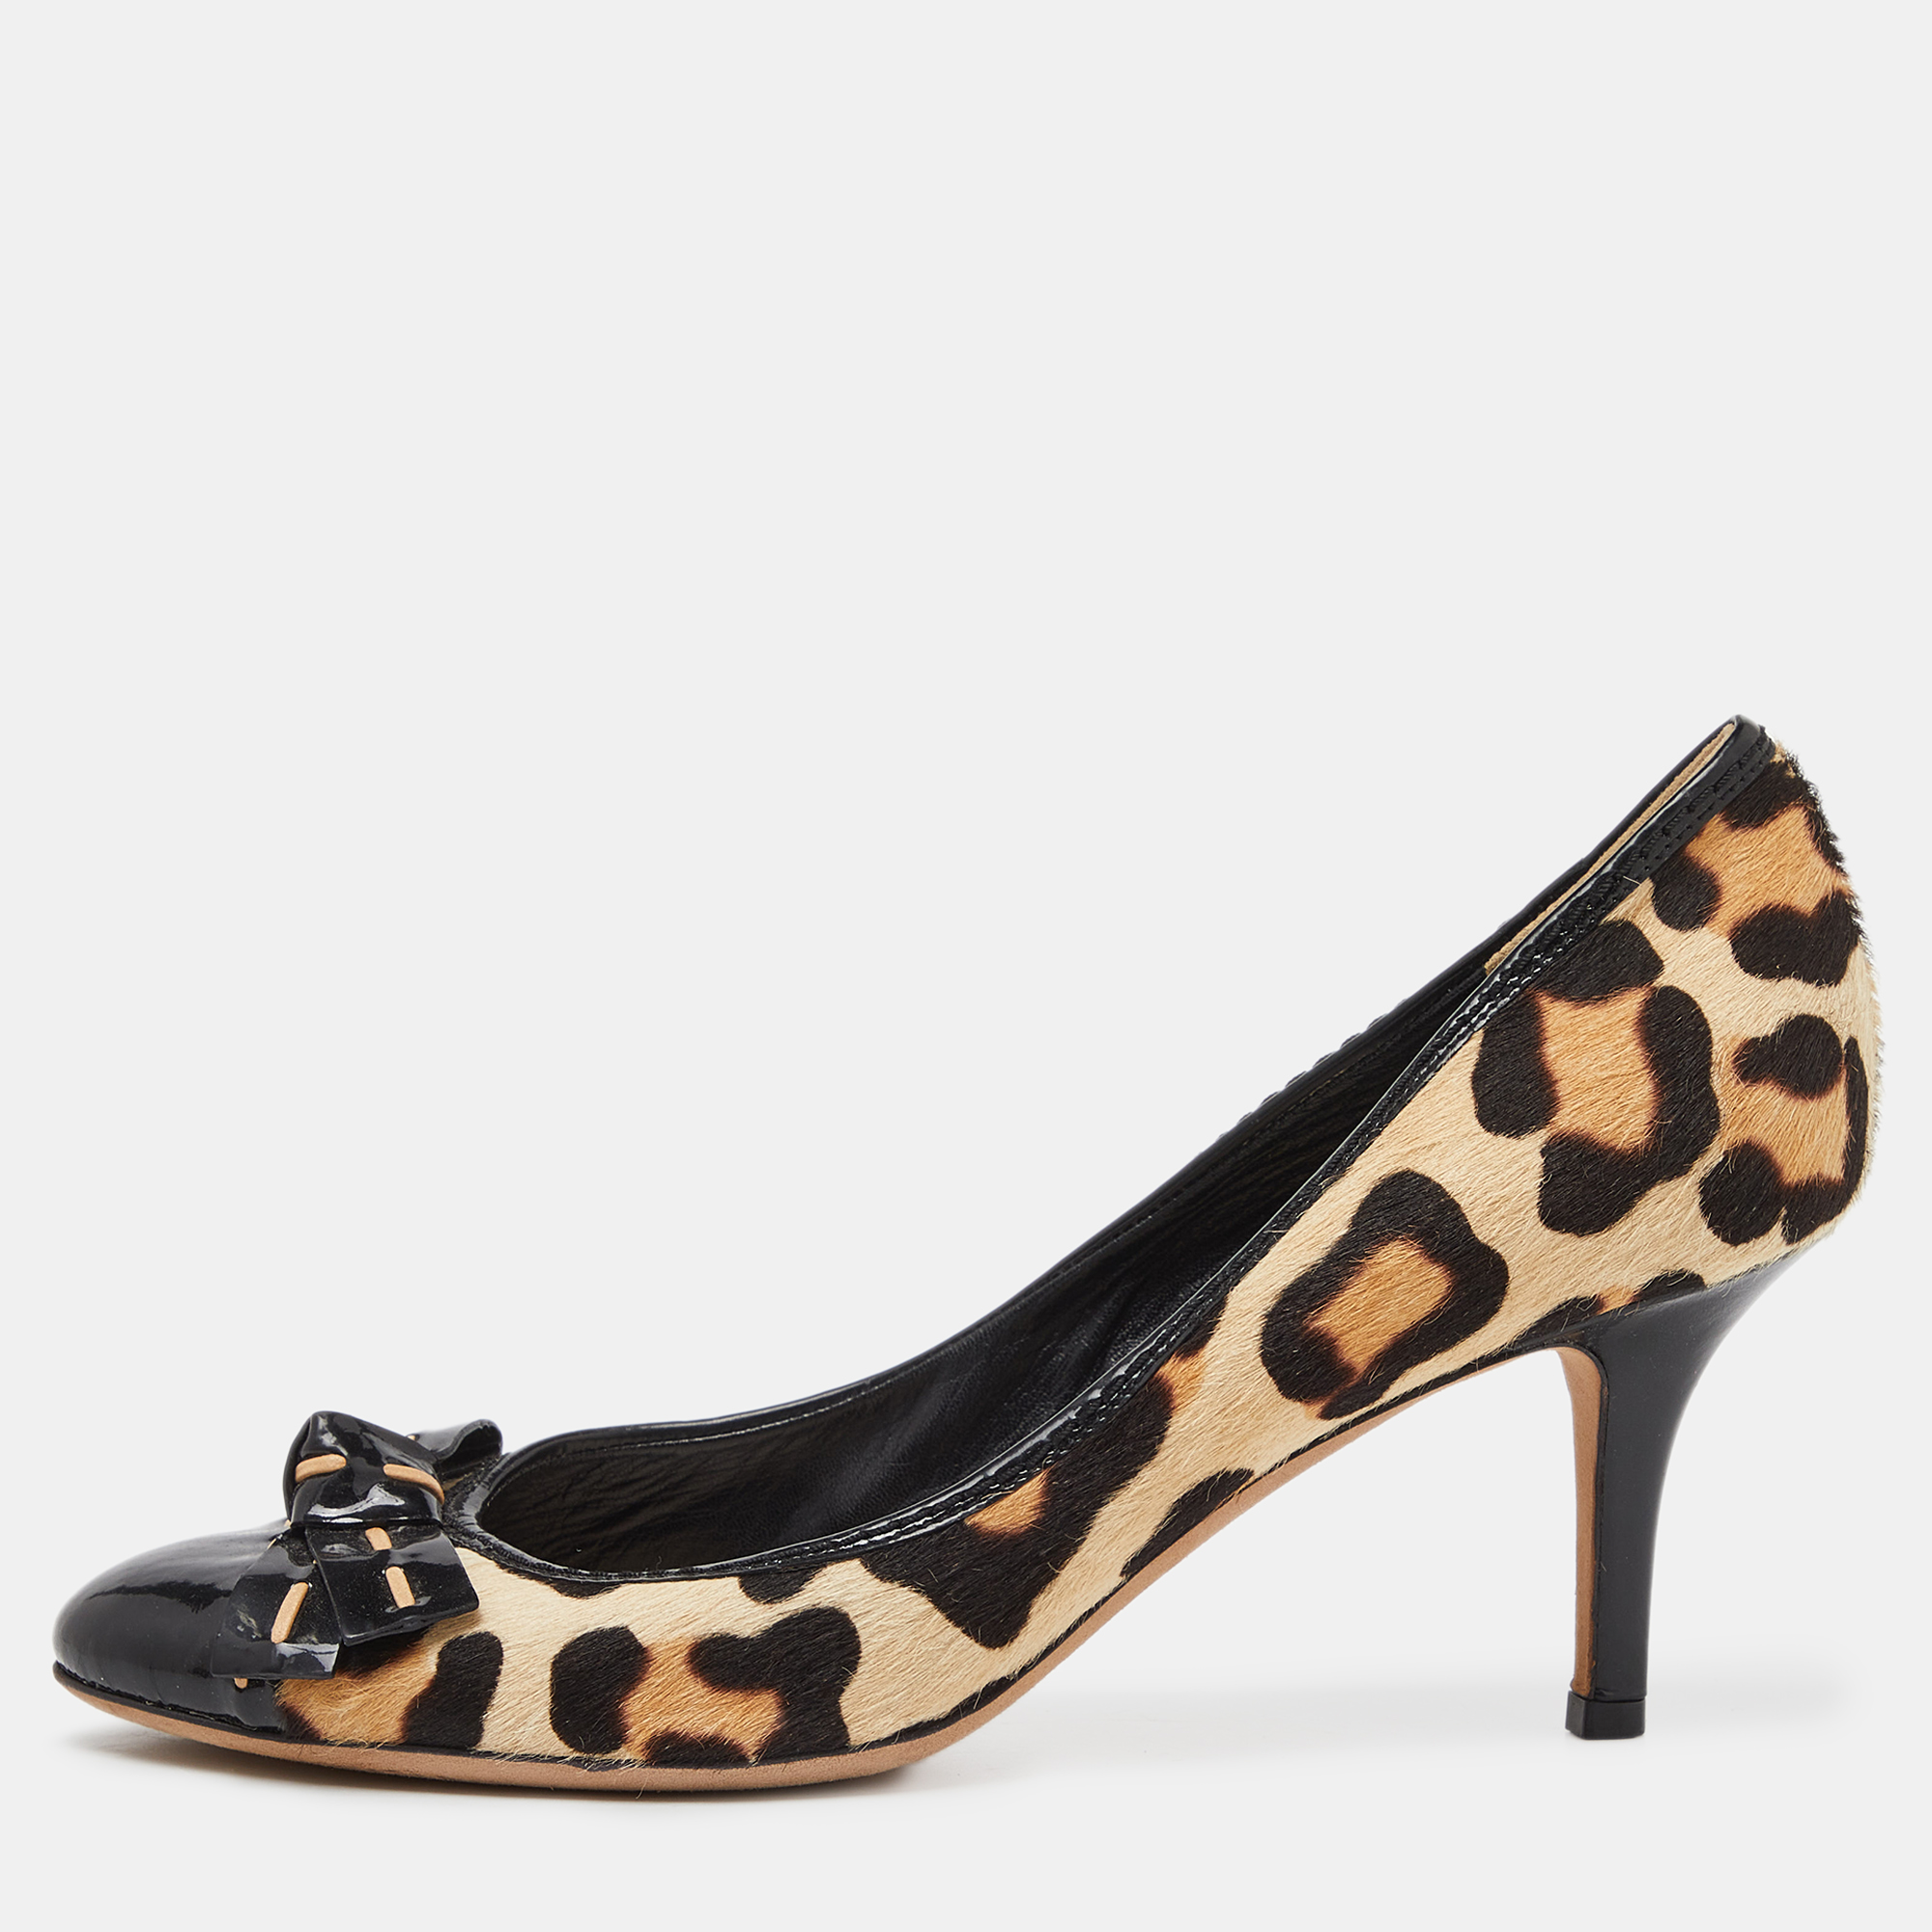 Dior black/beige leopard print calf hair and patent bow pumps size 39